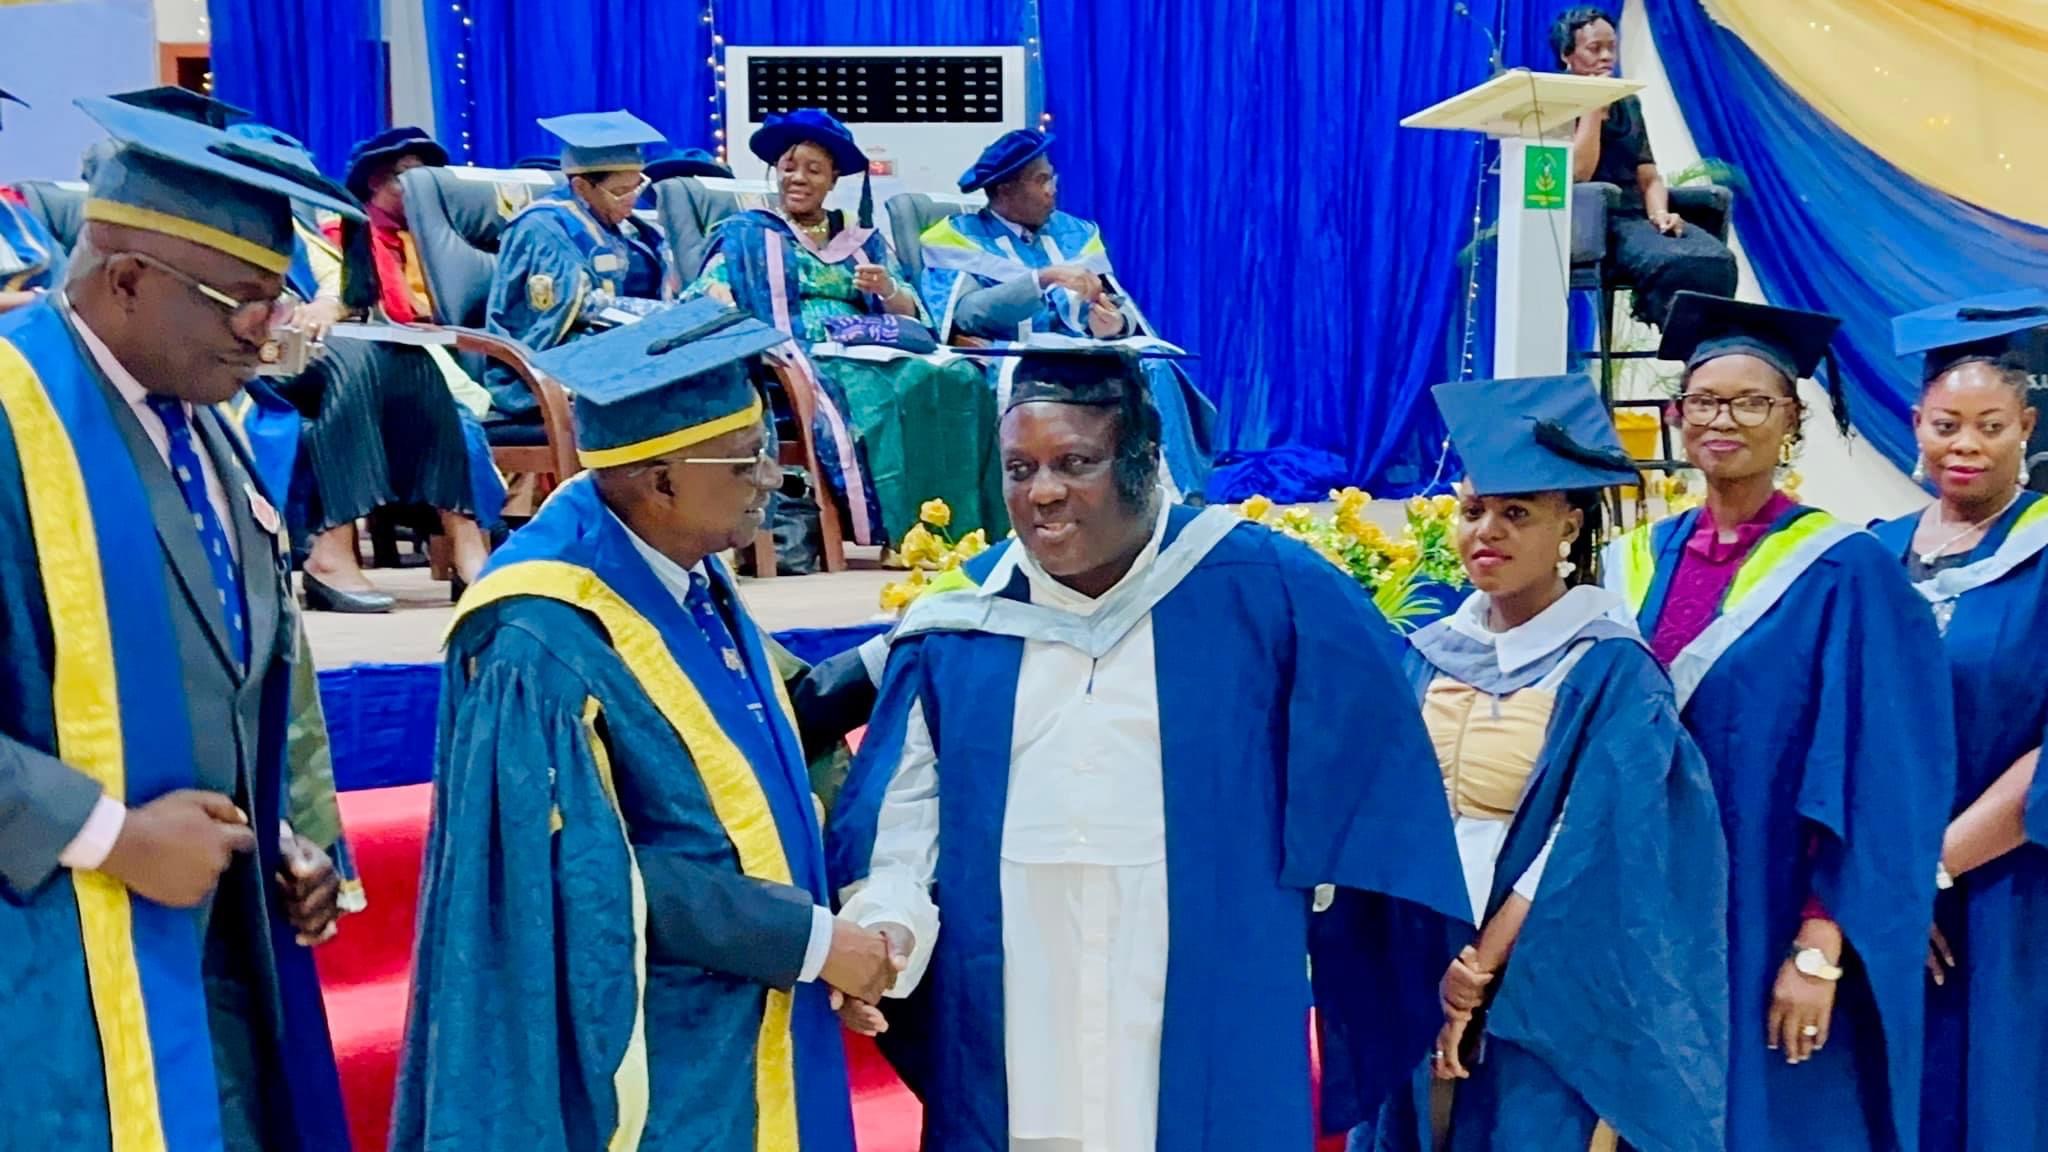 PHOTOS: From ‘Stage to Class’, Saheed Osupa now Graduate of Political Science